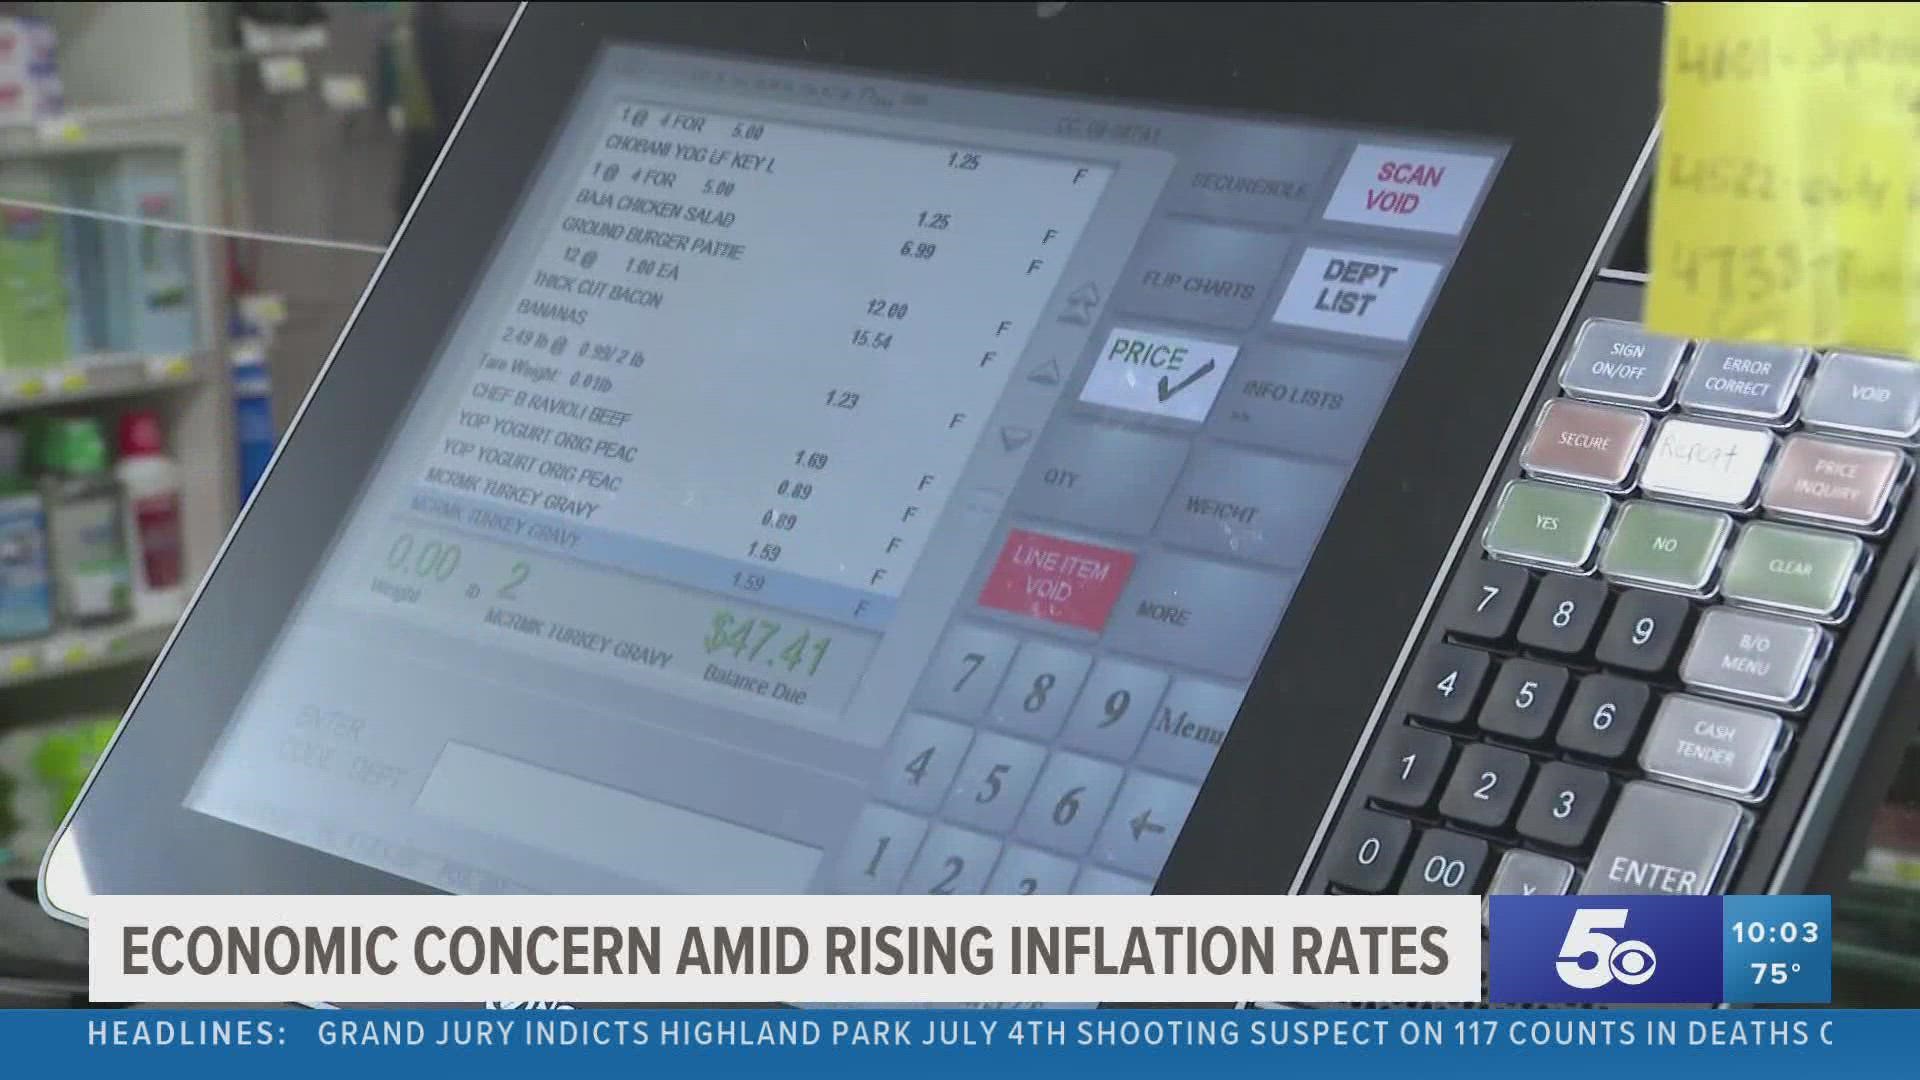 With inflation rates rising and the latest GDP report being released soon, economic experts are discussing a possible recession.